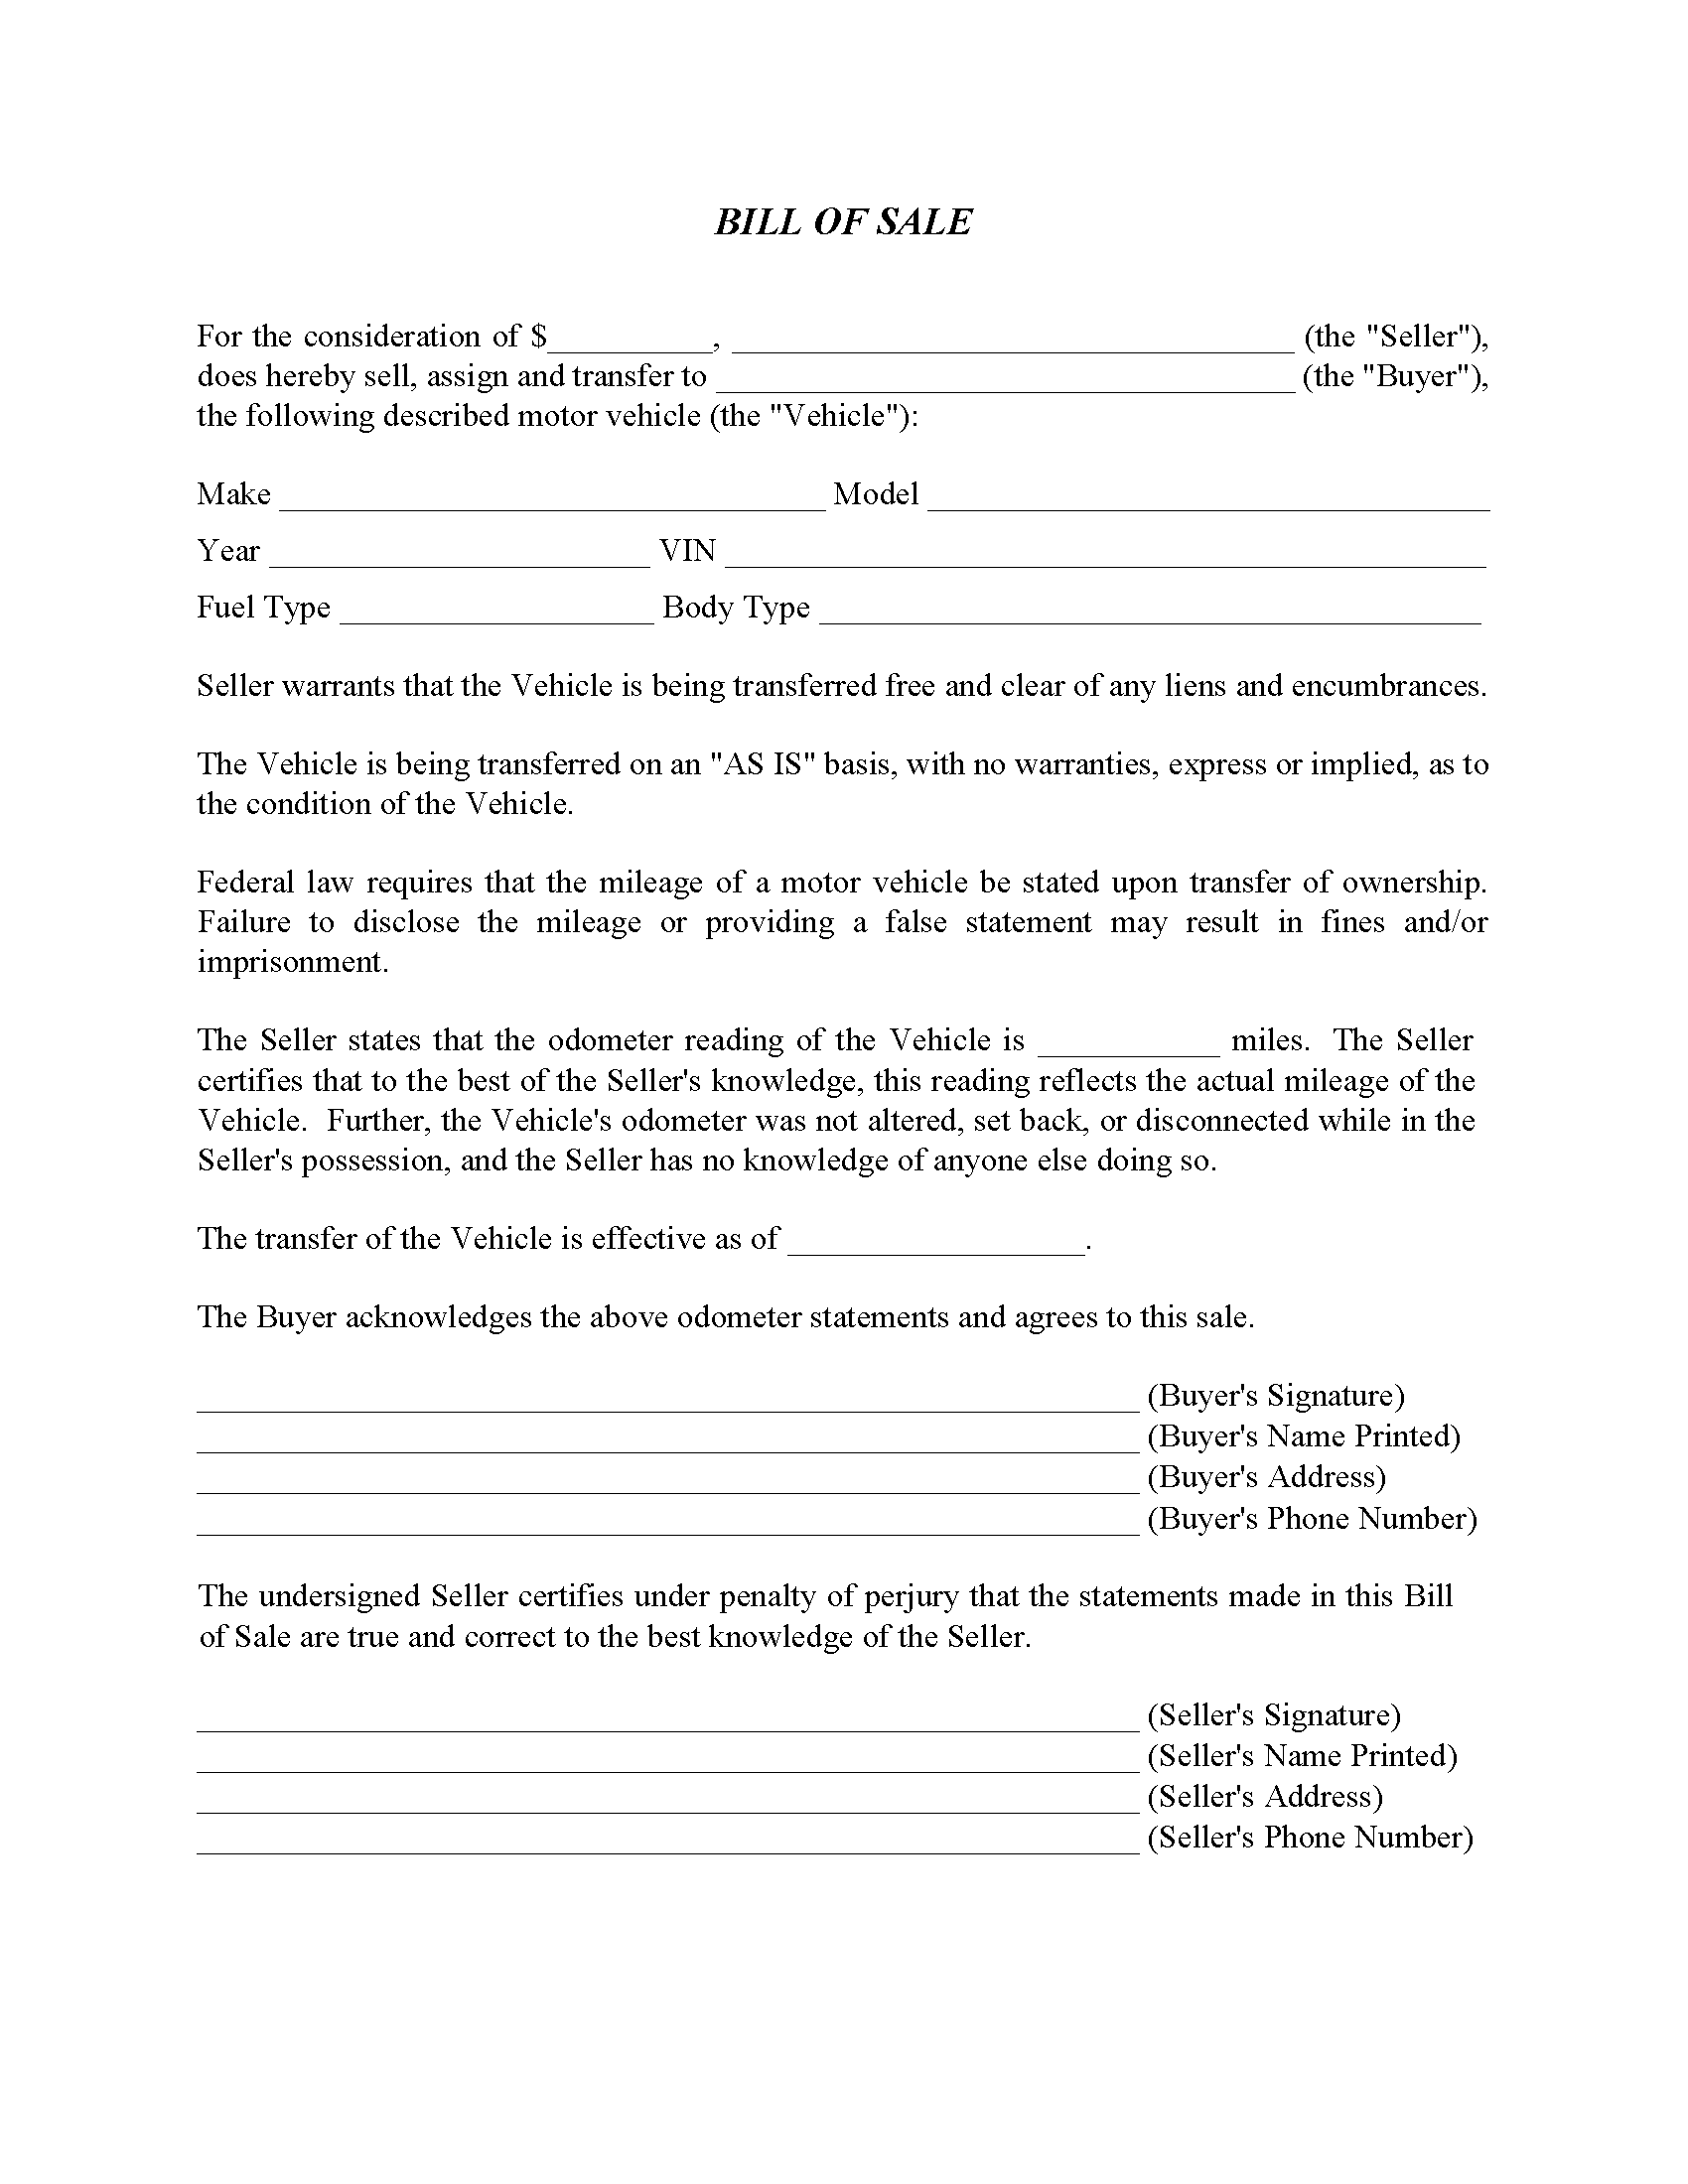 bill-of-sale-forms-free-printable-legal-forms